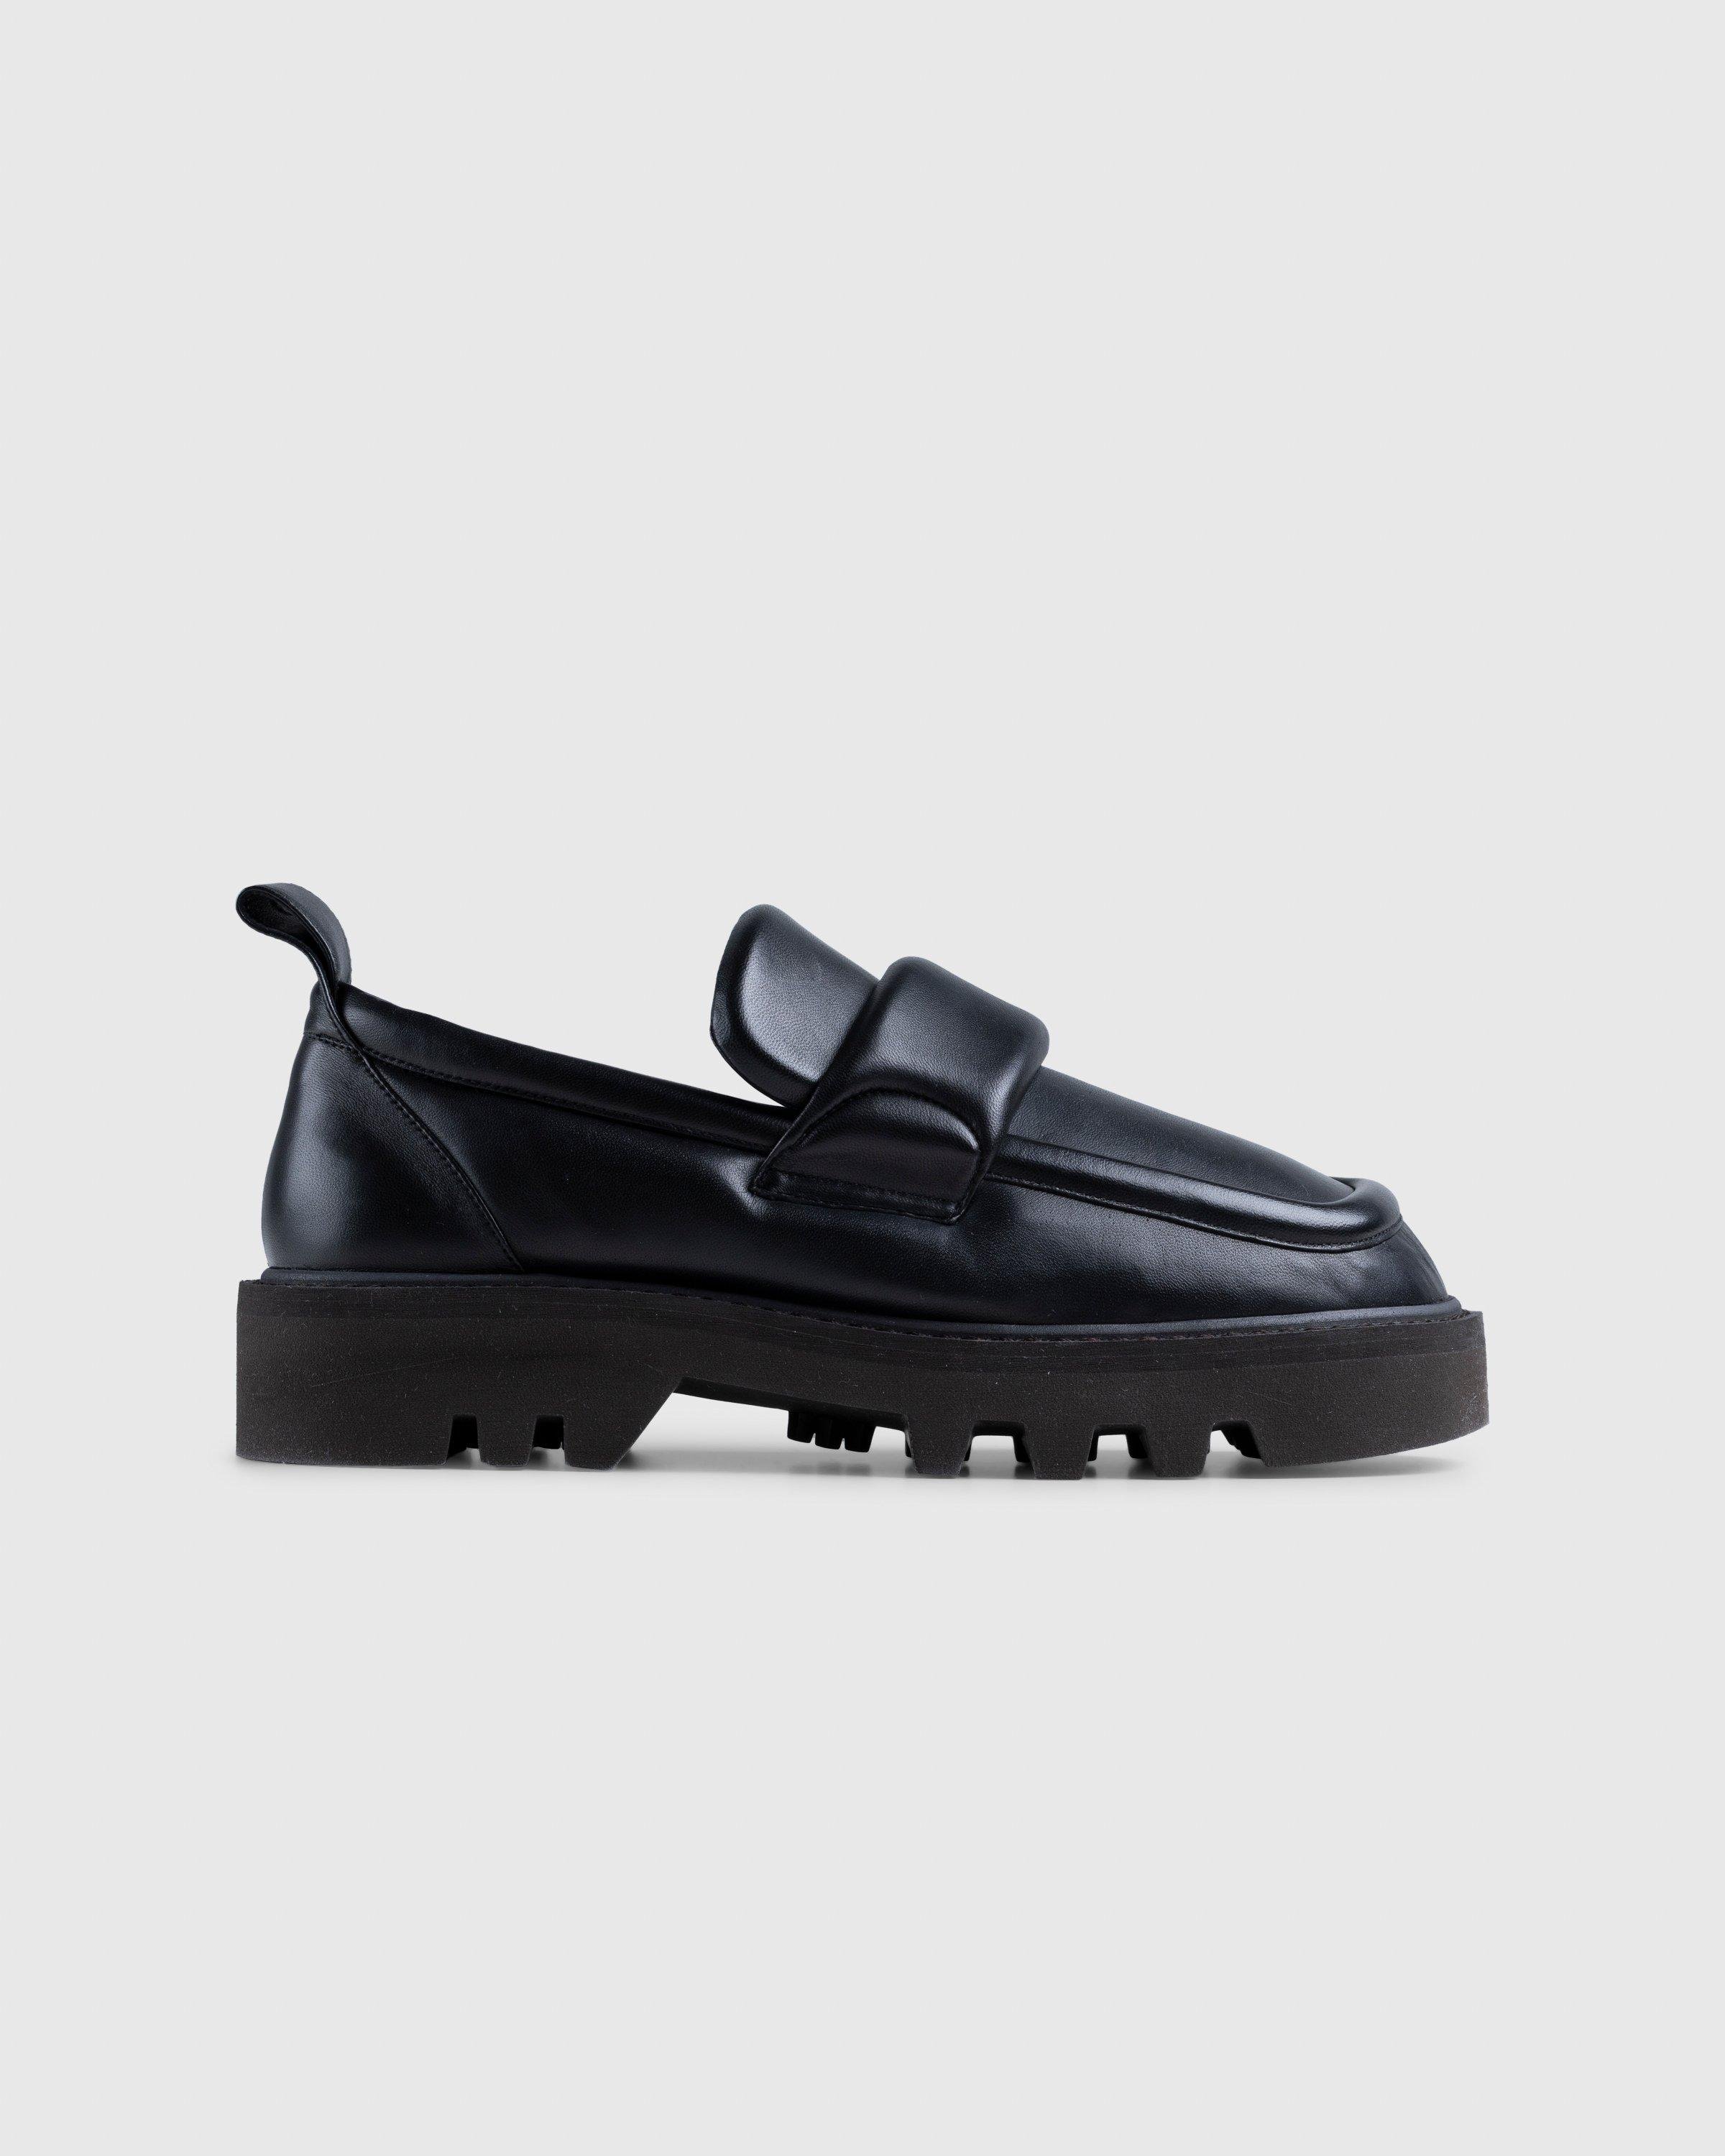 Dries van NotenPadded Leather Loafers Black by HIGHSNOBIETY